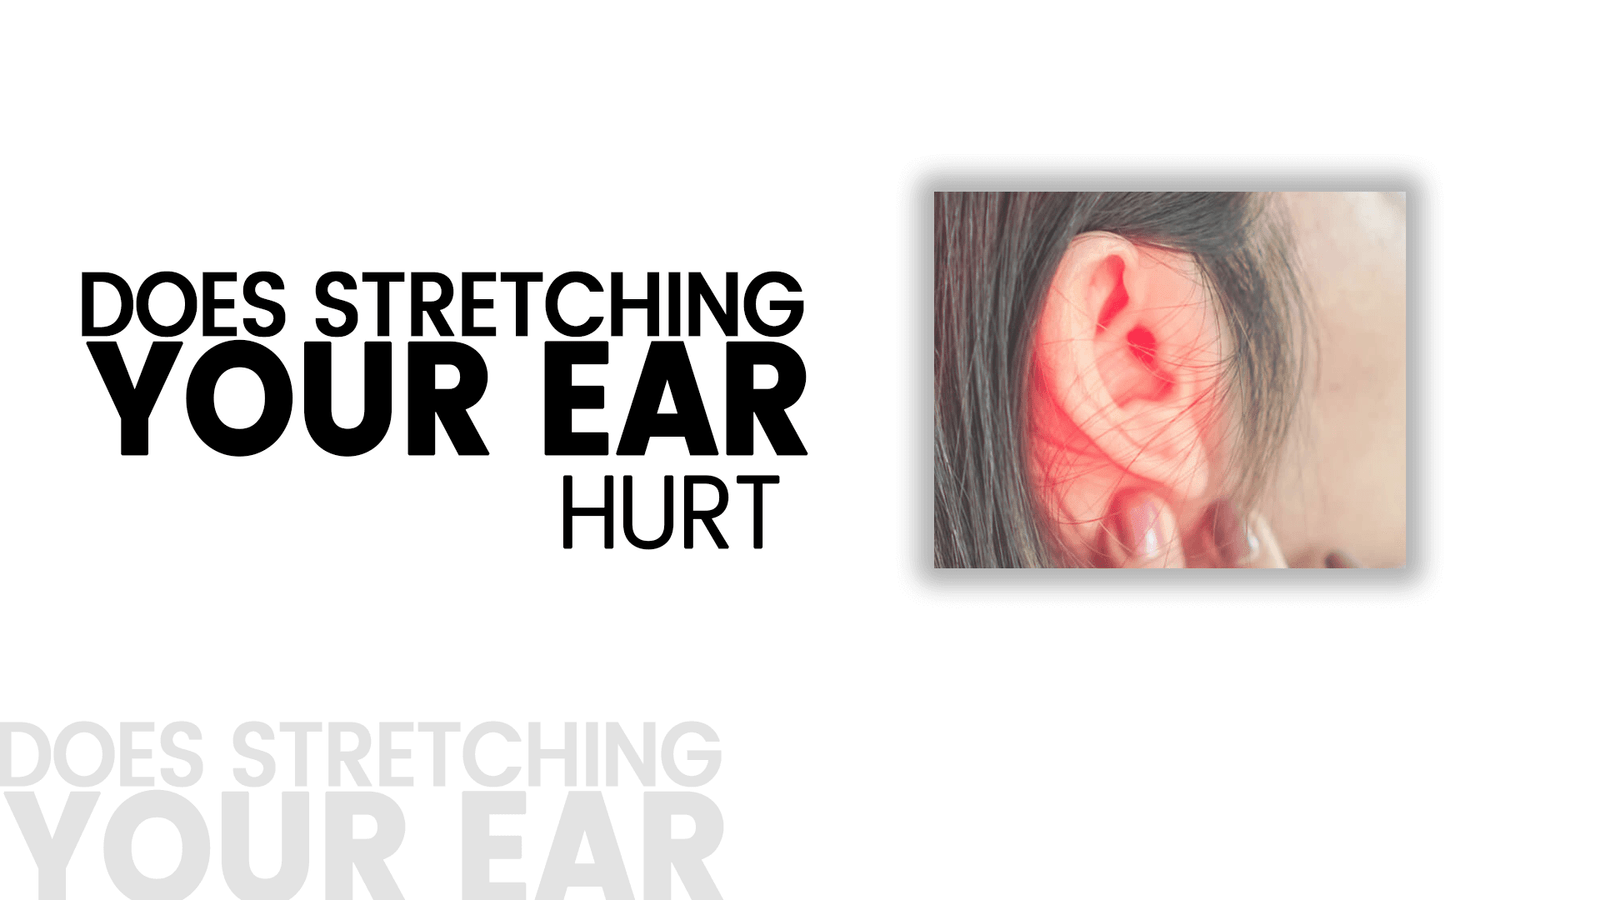 Does stretching your ear hurts